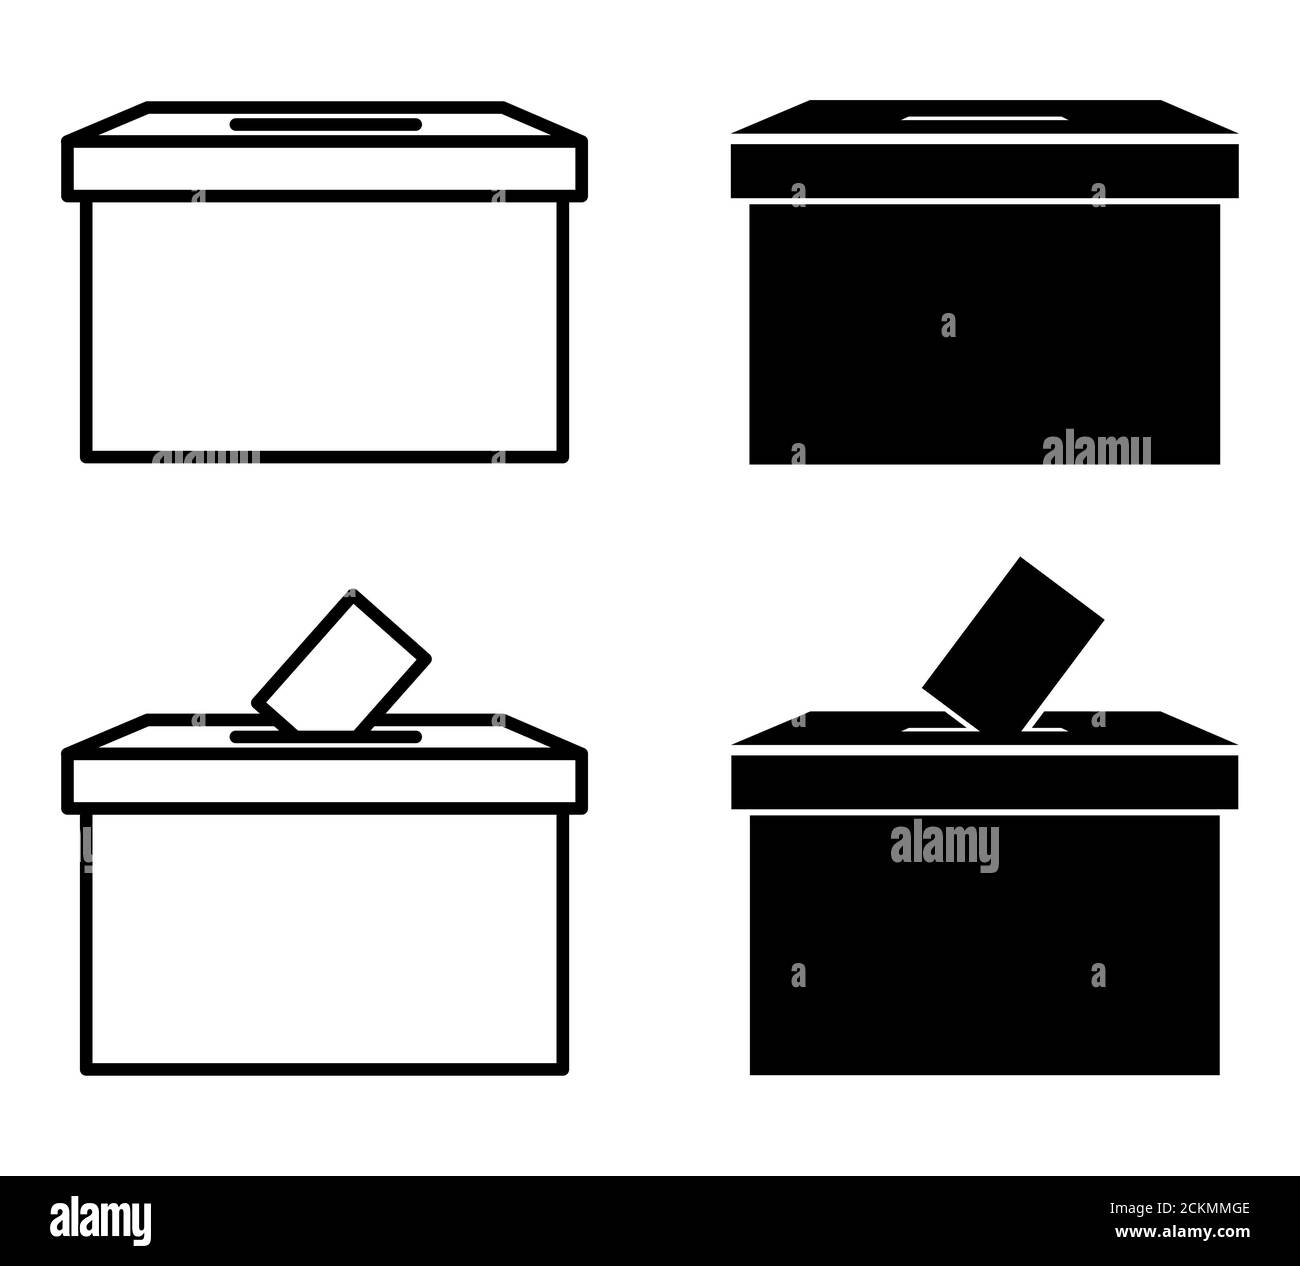 ballot box for election voting set black icons vector illustration isolated on white background Stock Photo